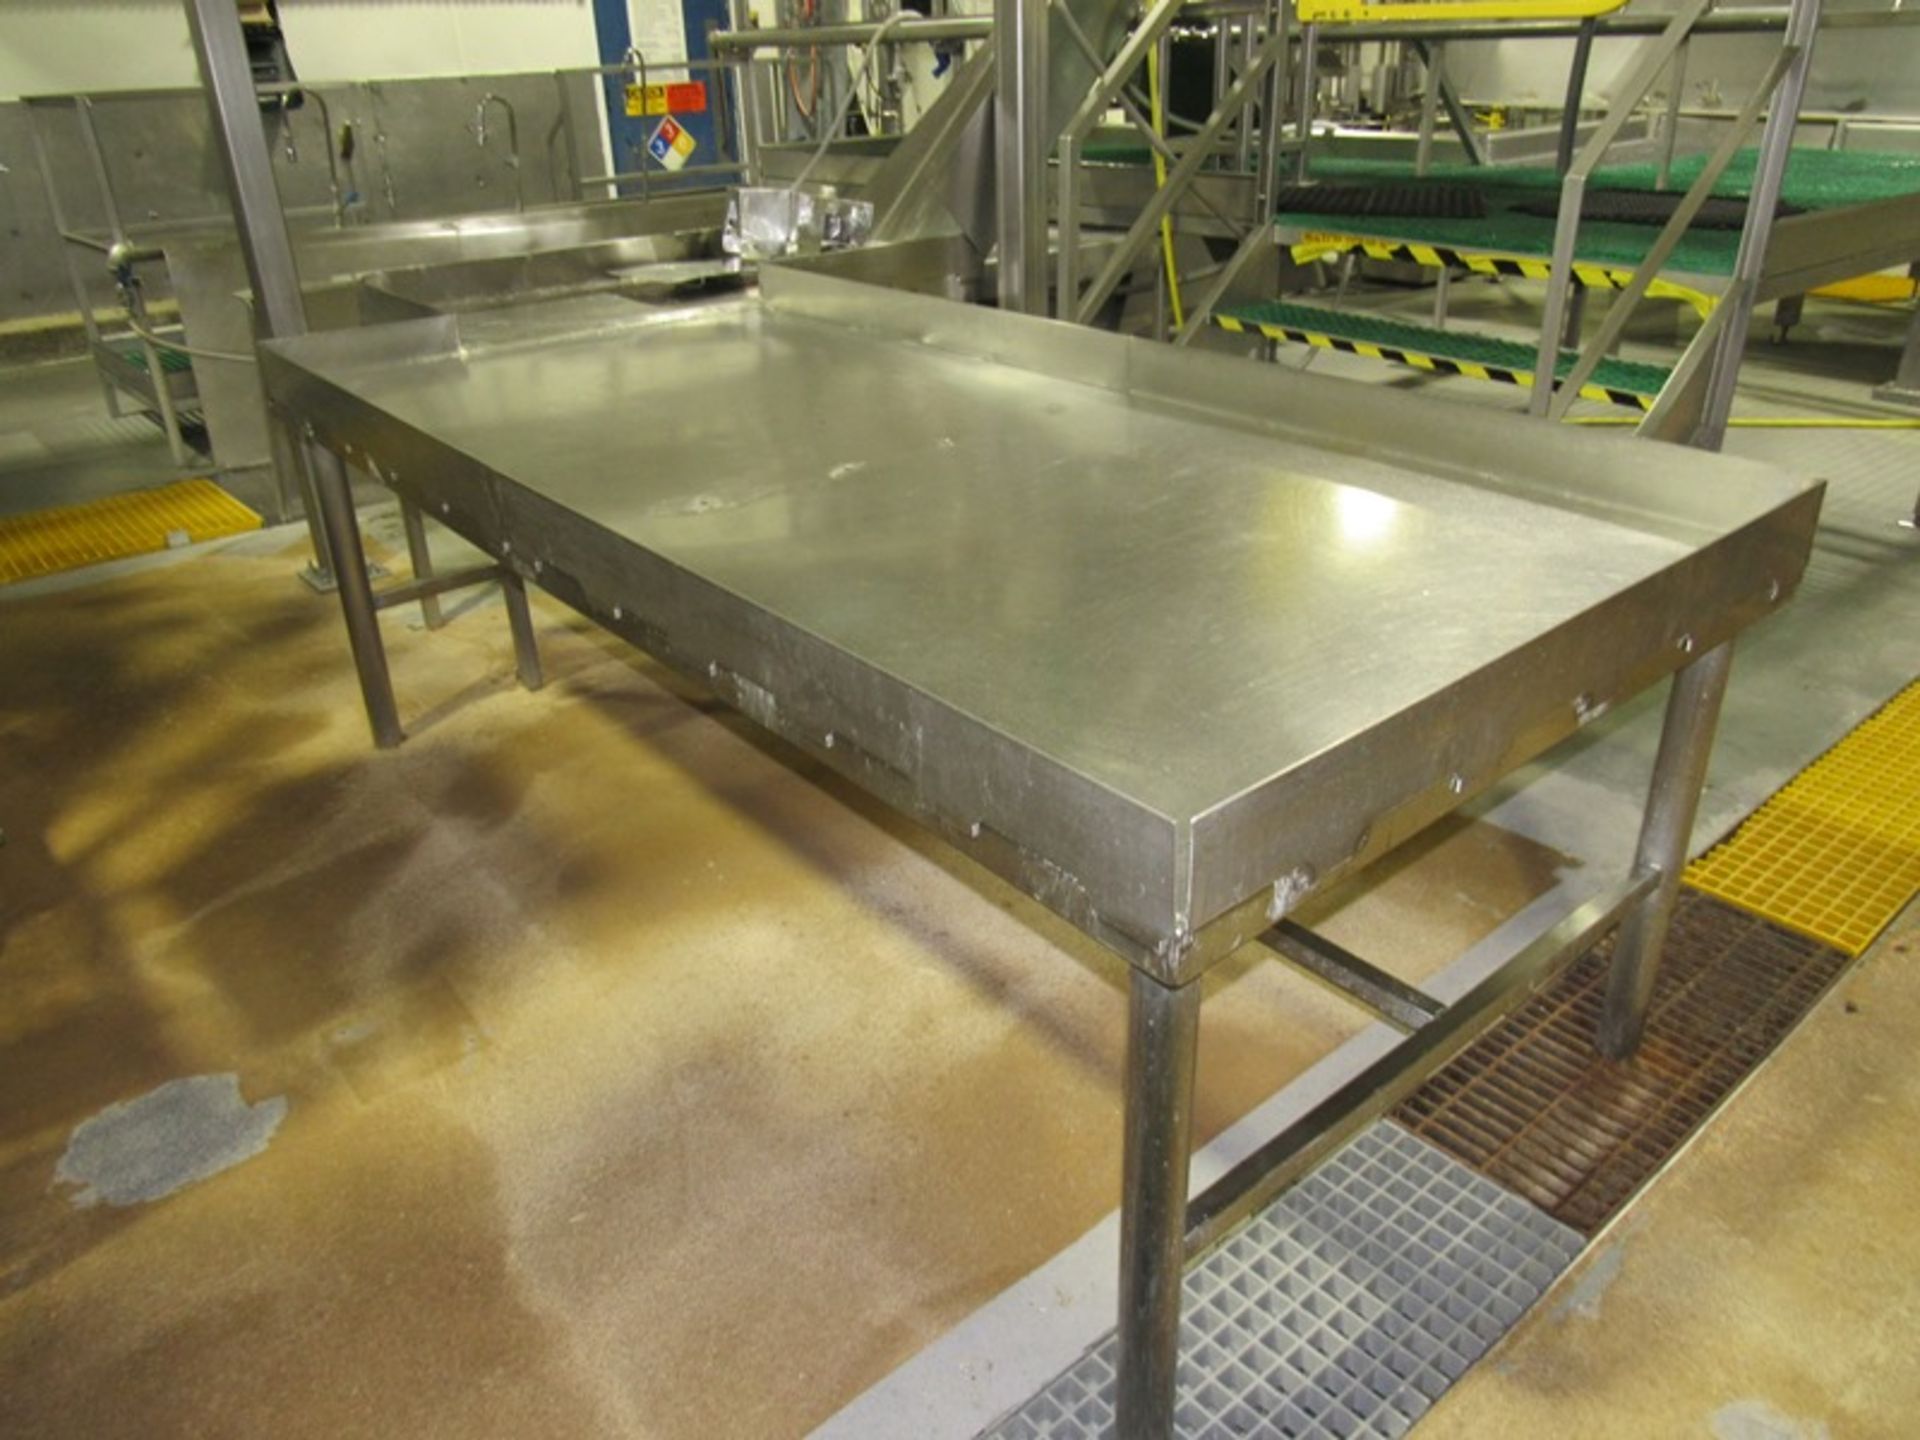 Stainless Steel Inspection Table, 45" W X 92" L with 24" W X 7' L weldment | Rig Fee: $75